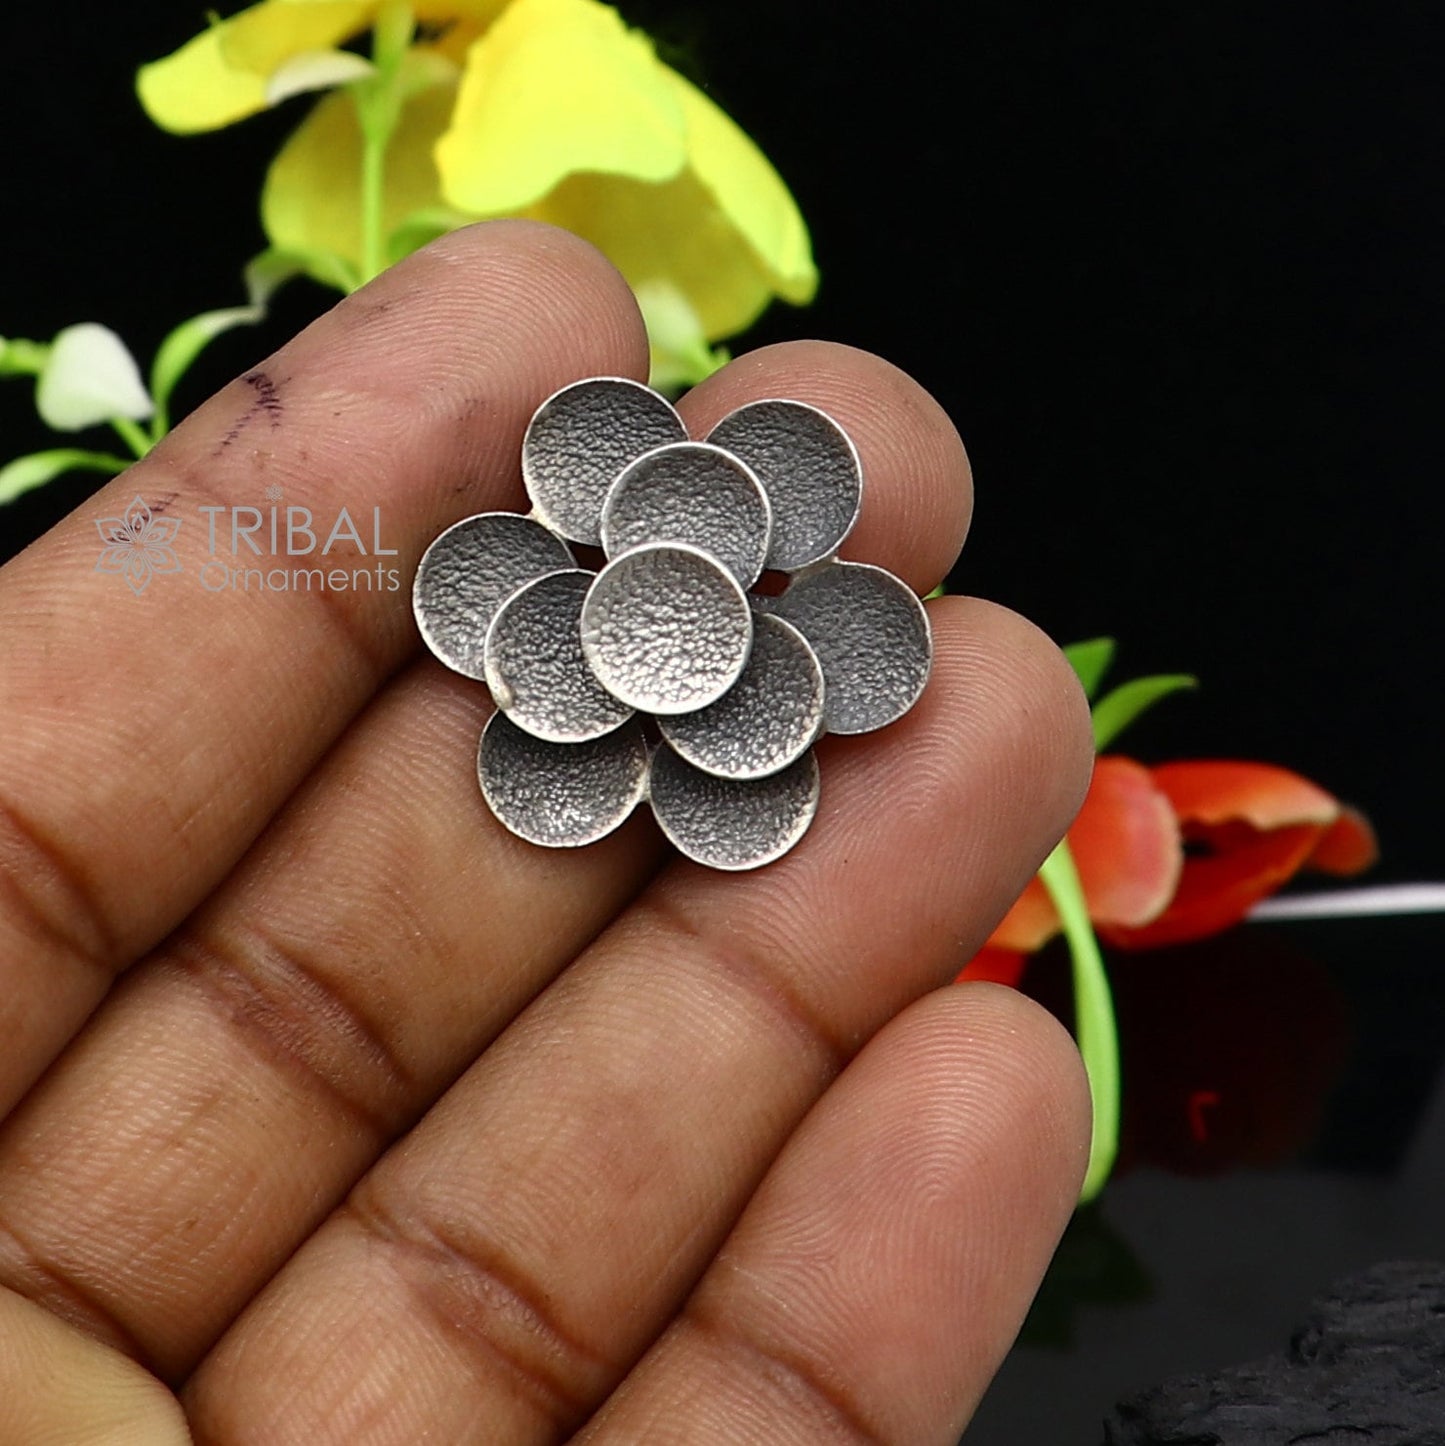 925 Sterling silver Indian Cultural design handmade silver vintage flower style adjustable ring indian tribal belly dance jewelry sr398 - TRIBAL ORNAMENTS